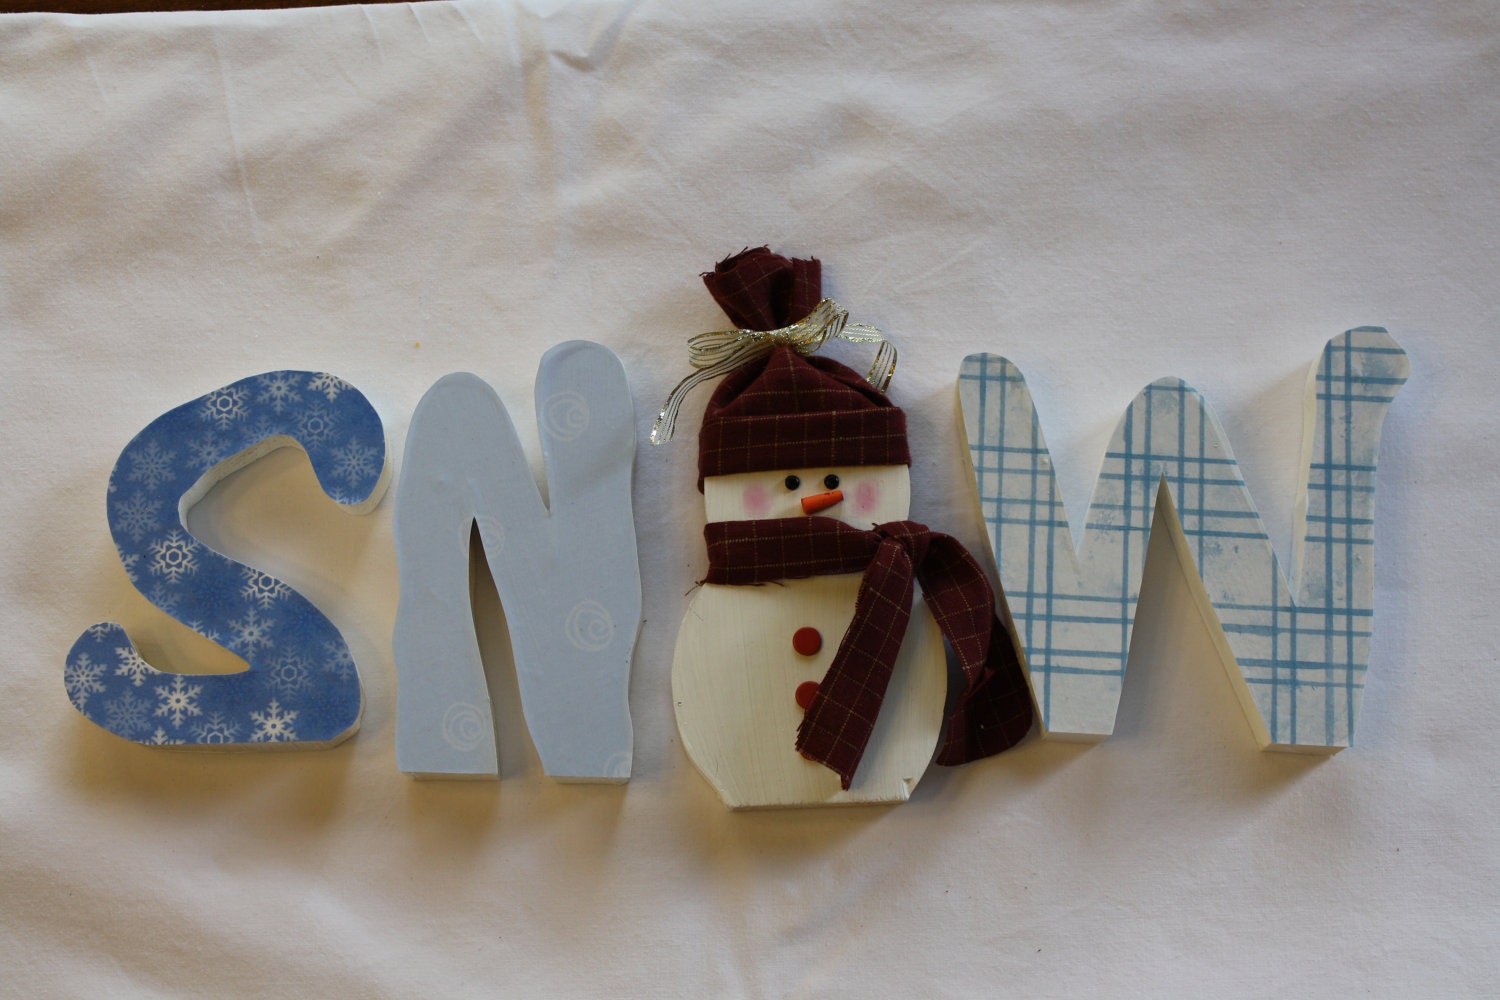 Snow unfinished wood word to decorate your home for the season